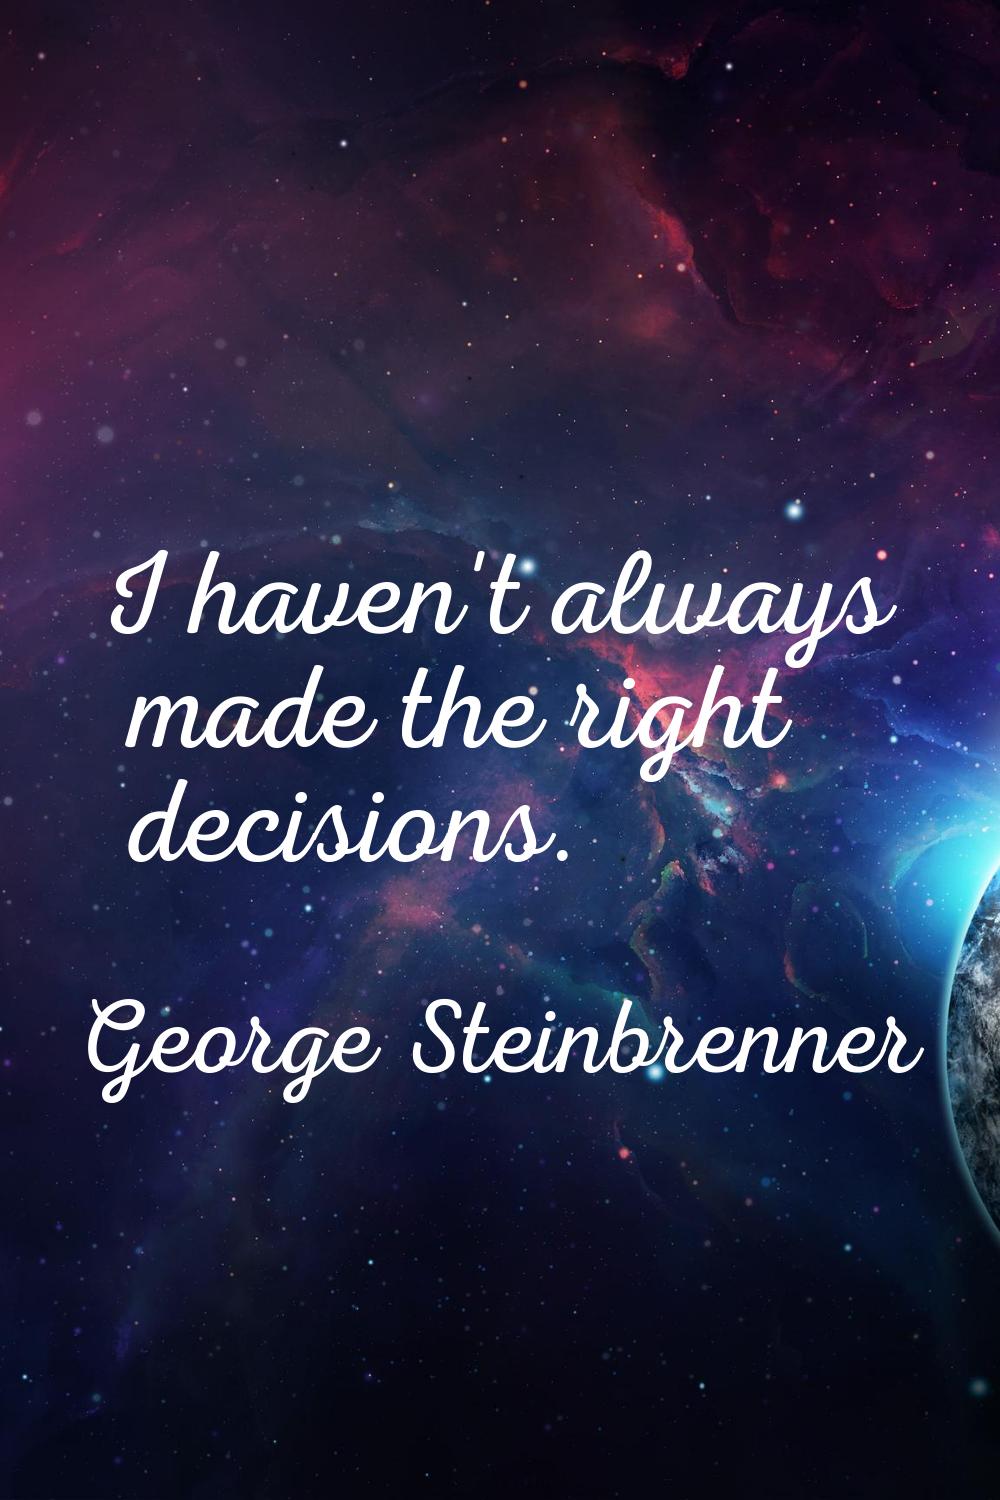 I haven't always made the right decisions.